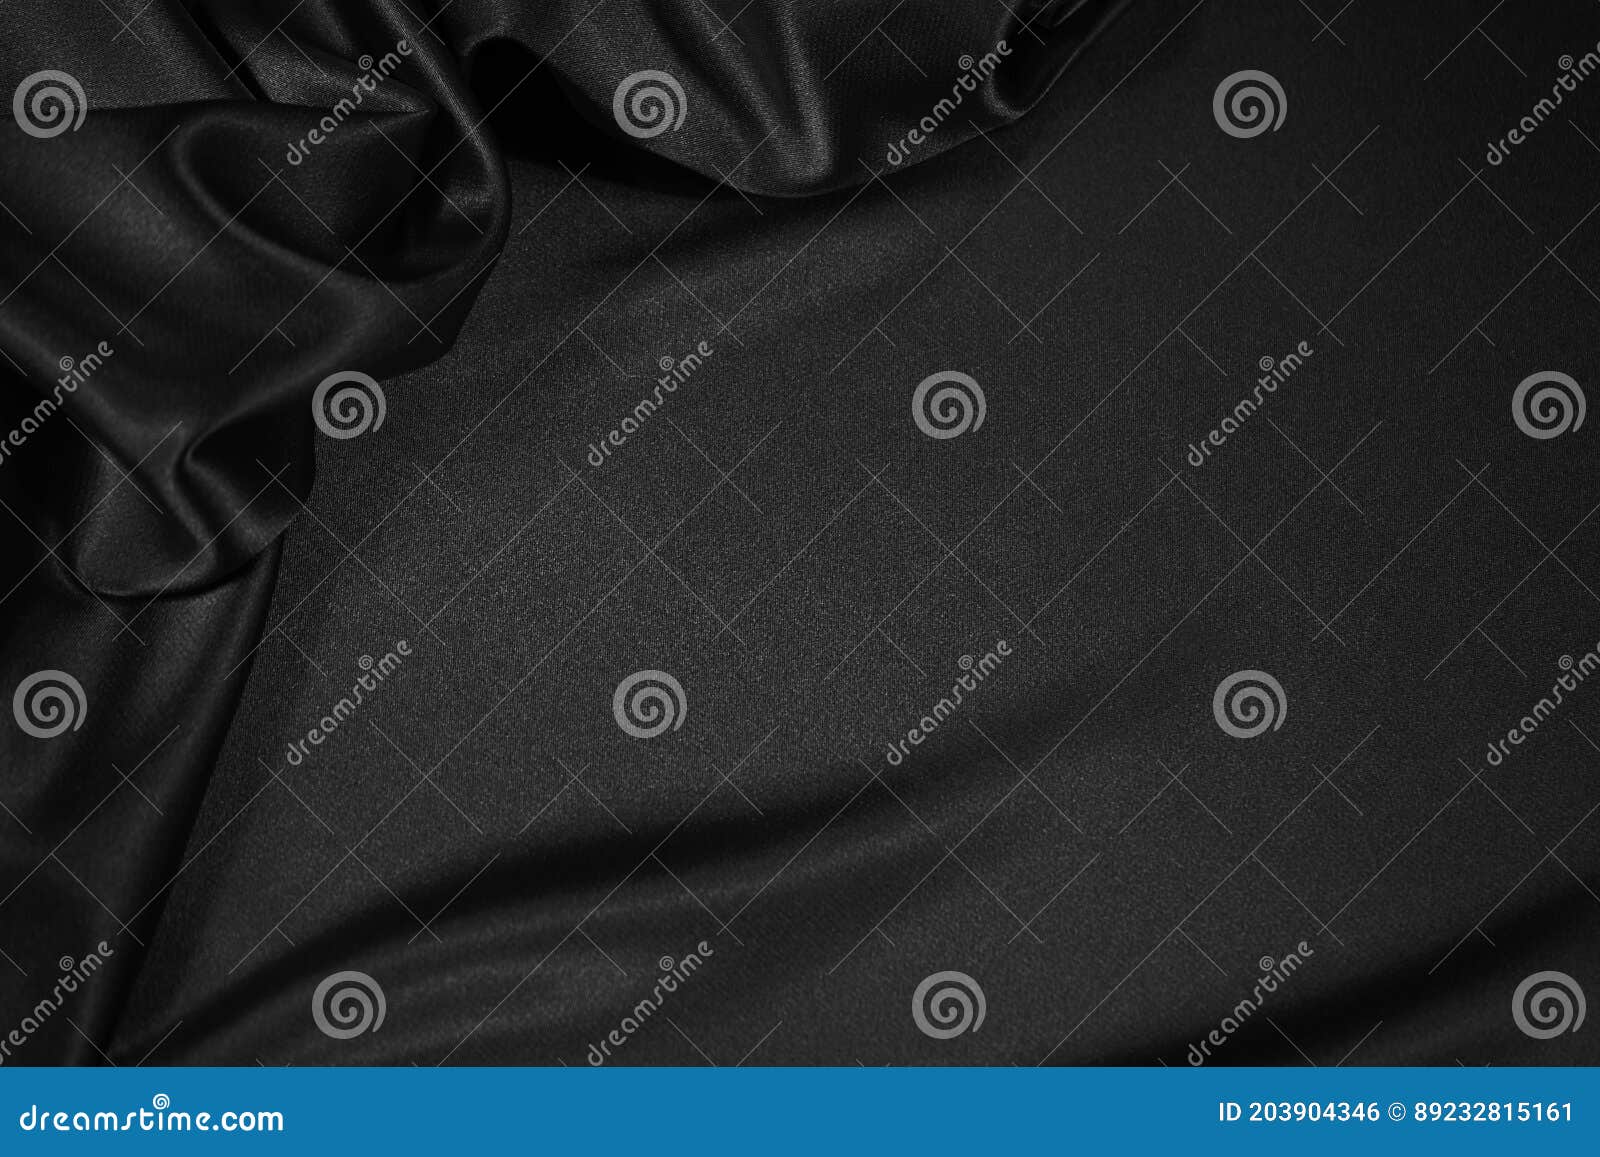 Premium Photo  Black fabric background with copy space 3d render